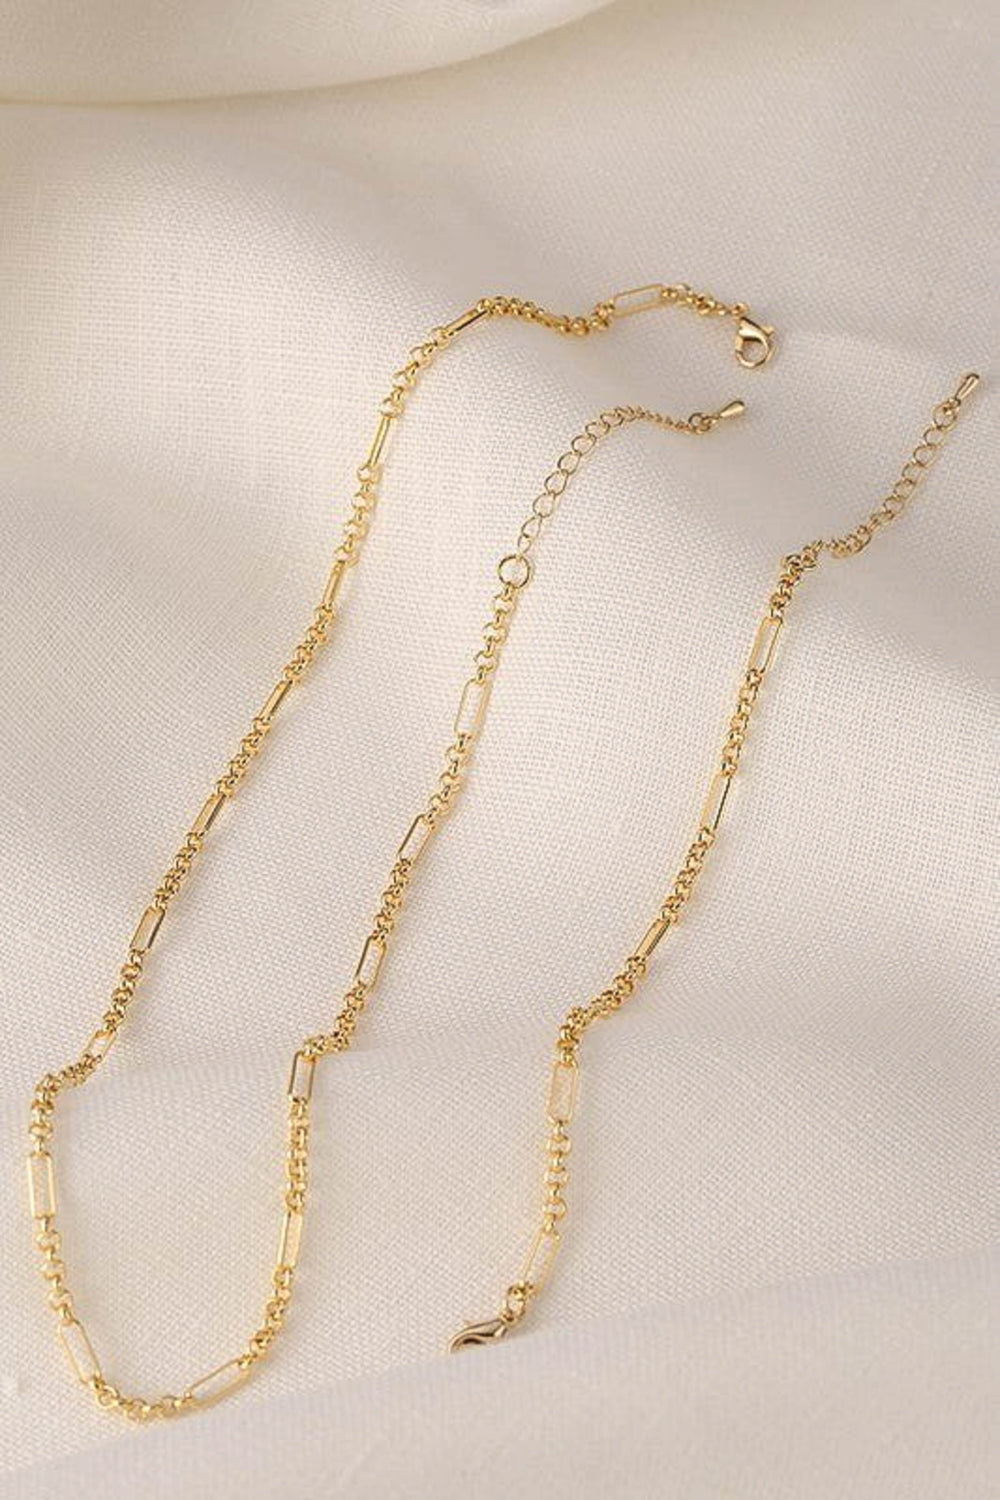 Petal and Pup USA ACCESSORIES Chain Bracelet and Necklace Set- Gold One Size